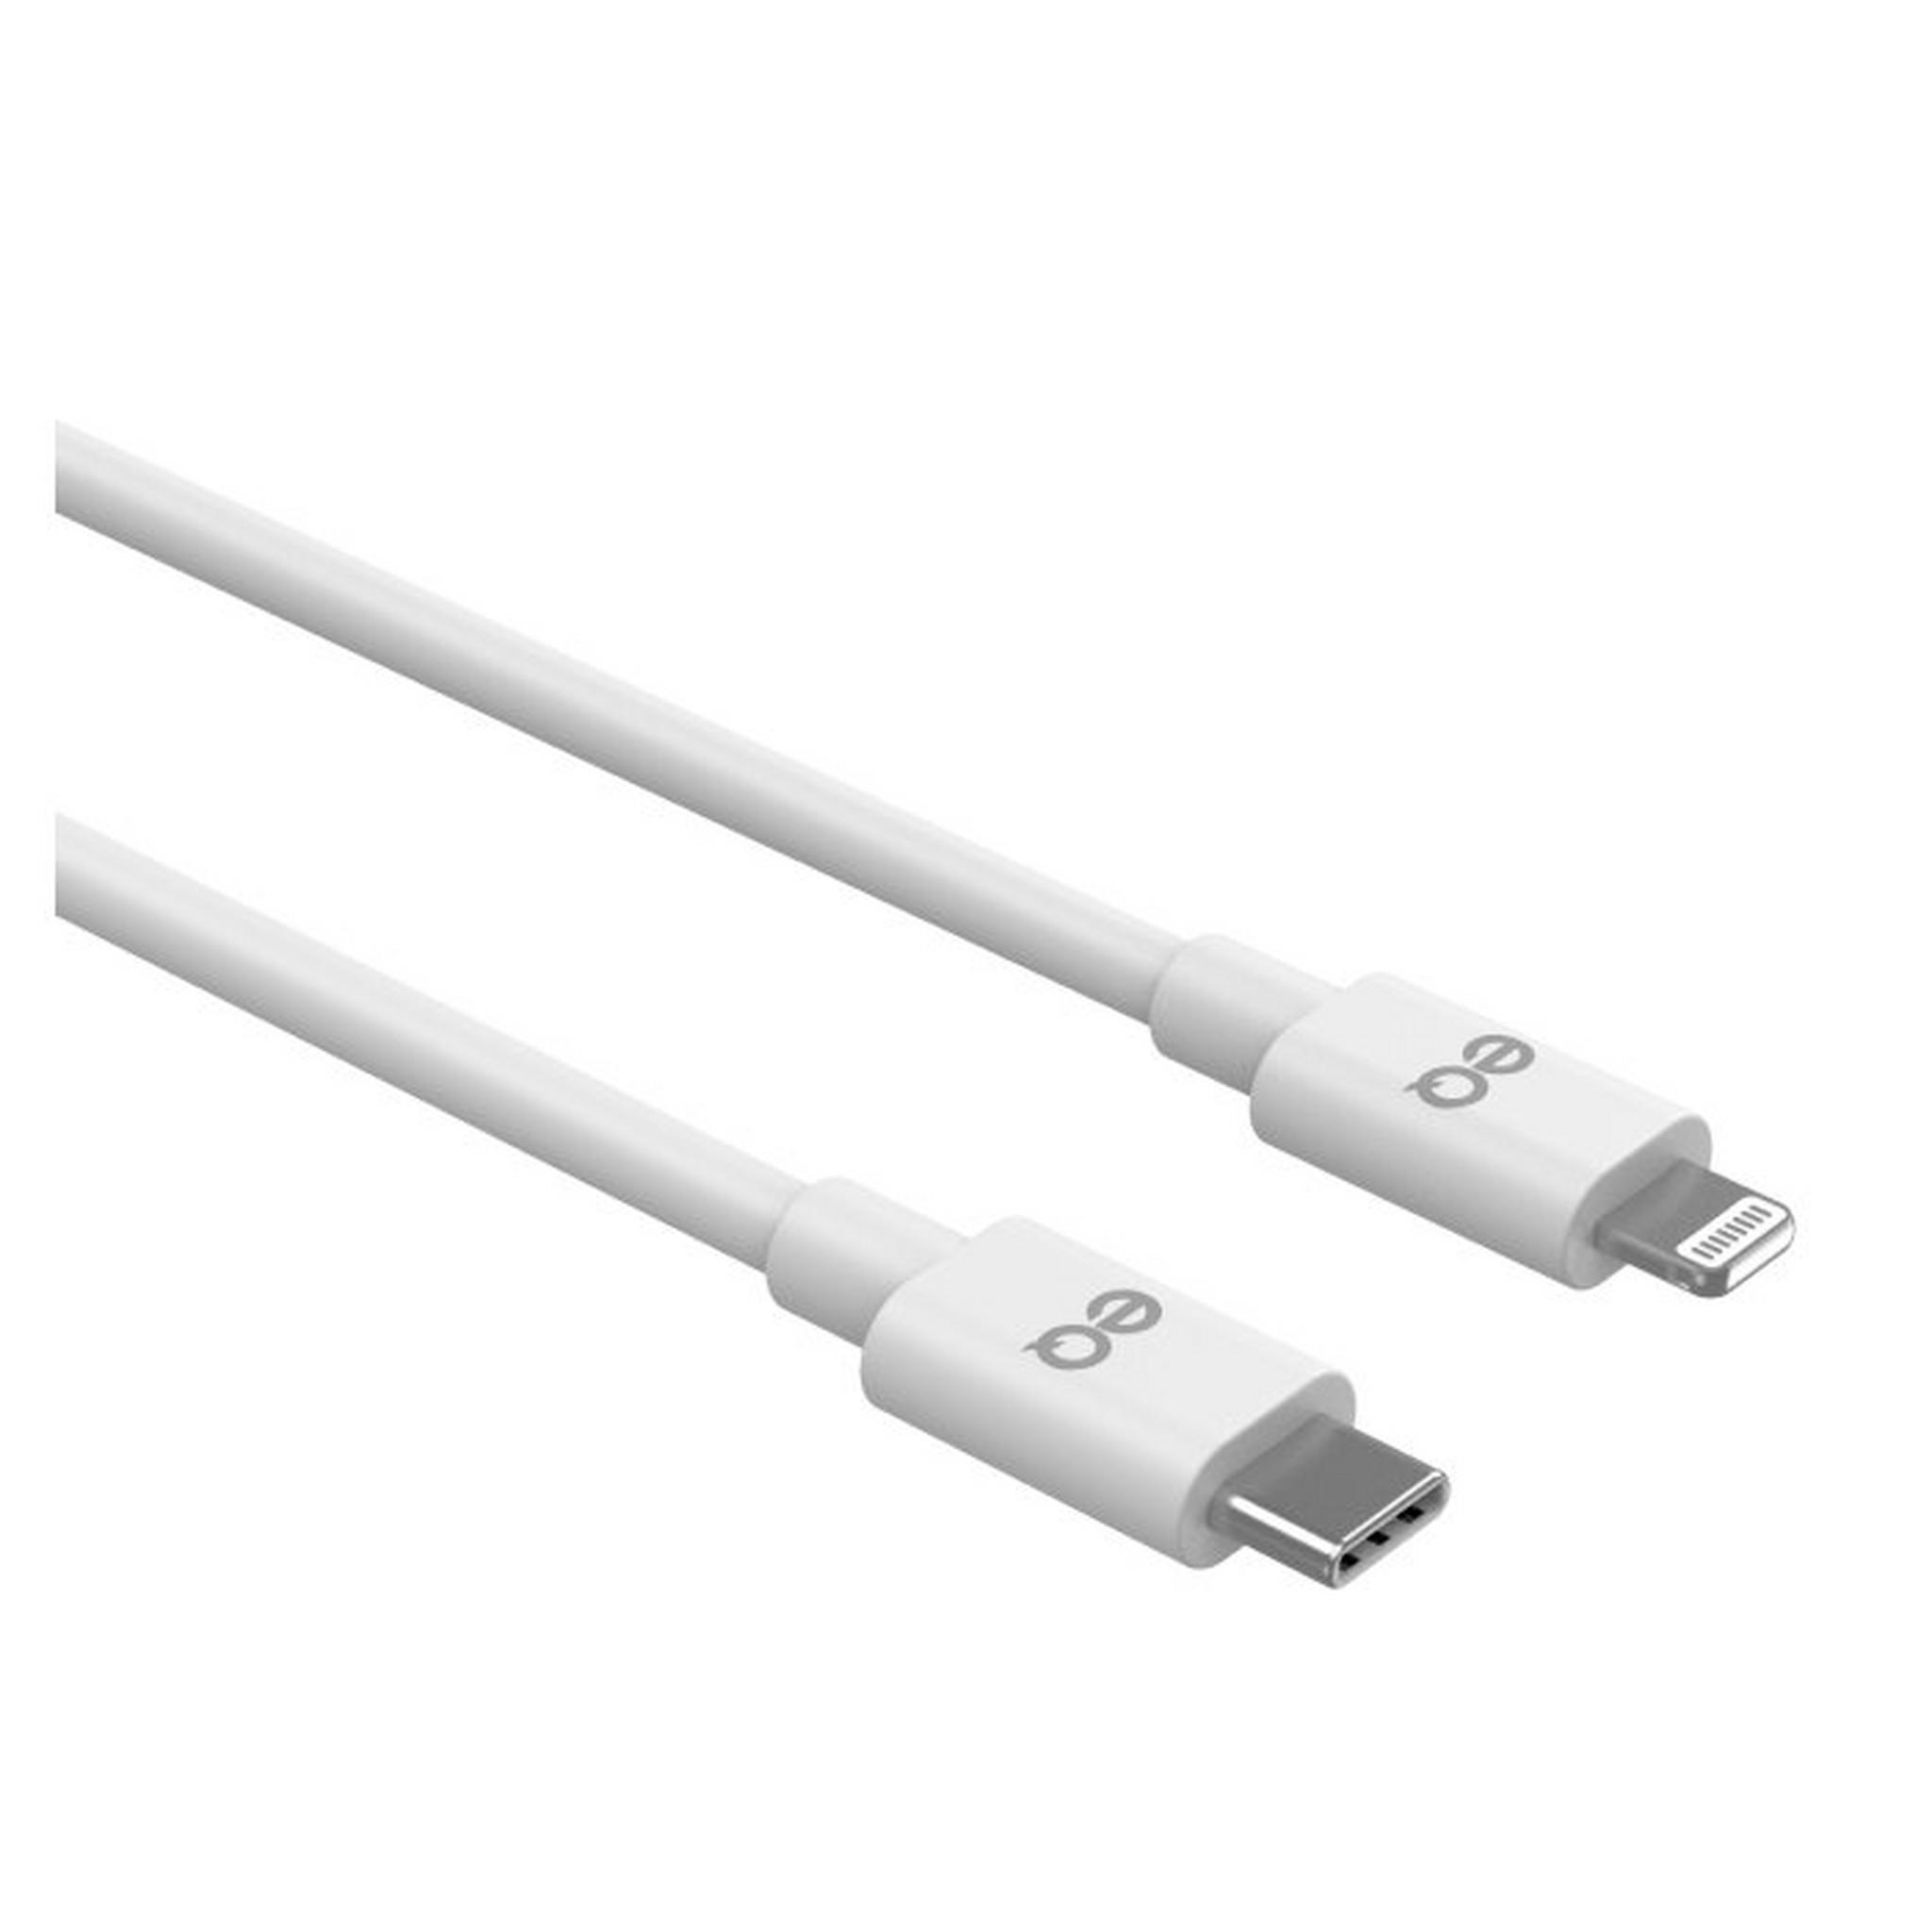 EQ Type-C to Lightning 1M Cable - White